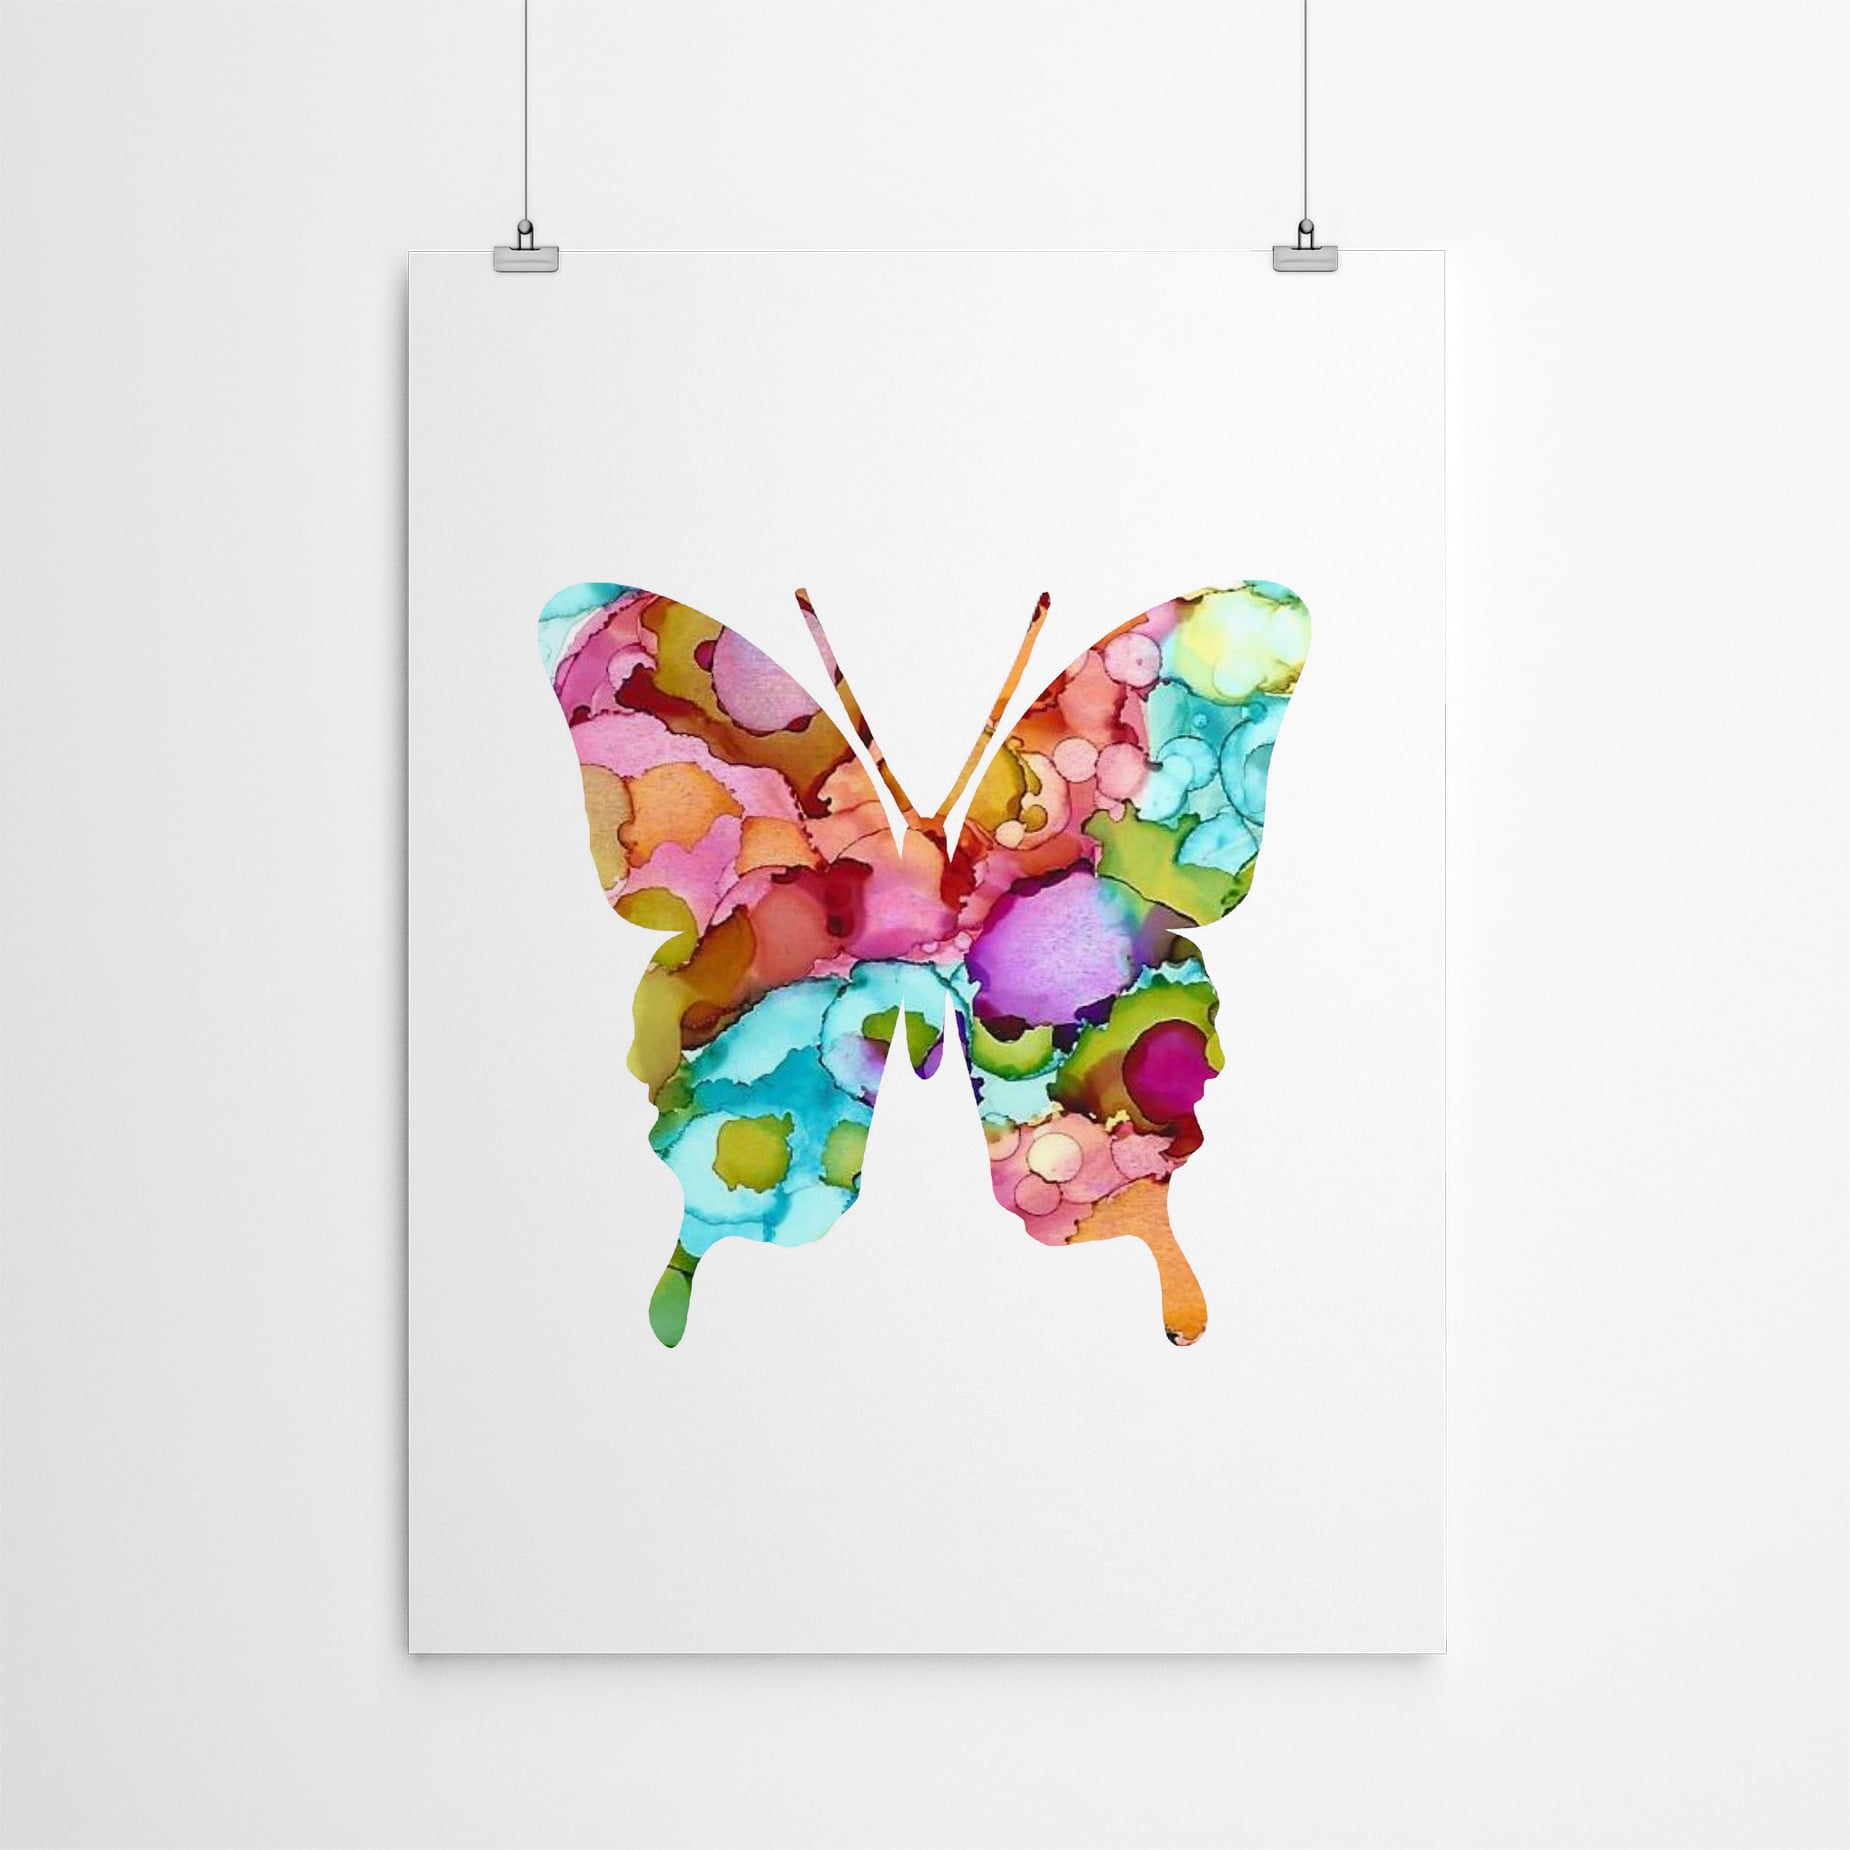 Americanflat Animals 22x28 Poster - Monarch Butterfly Wall Art